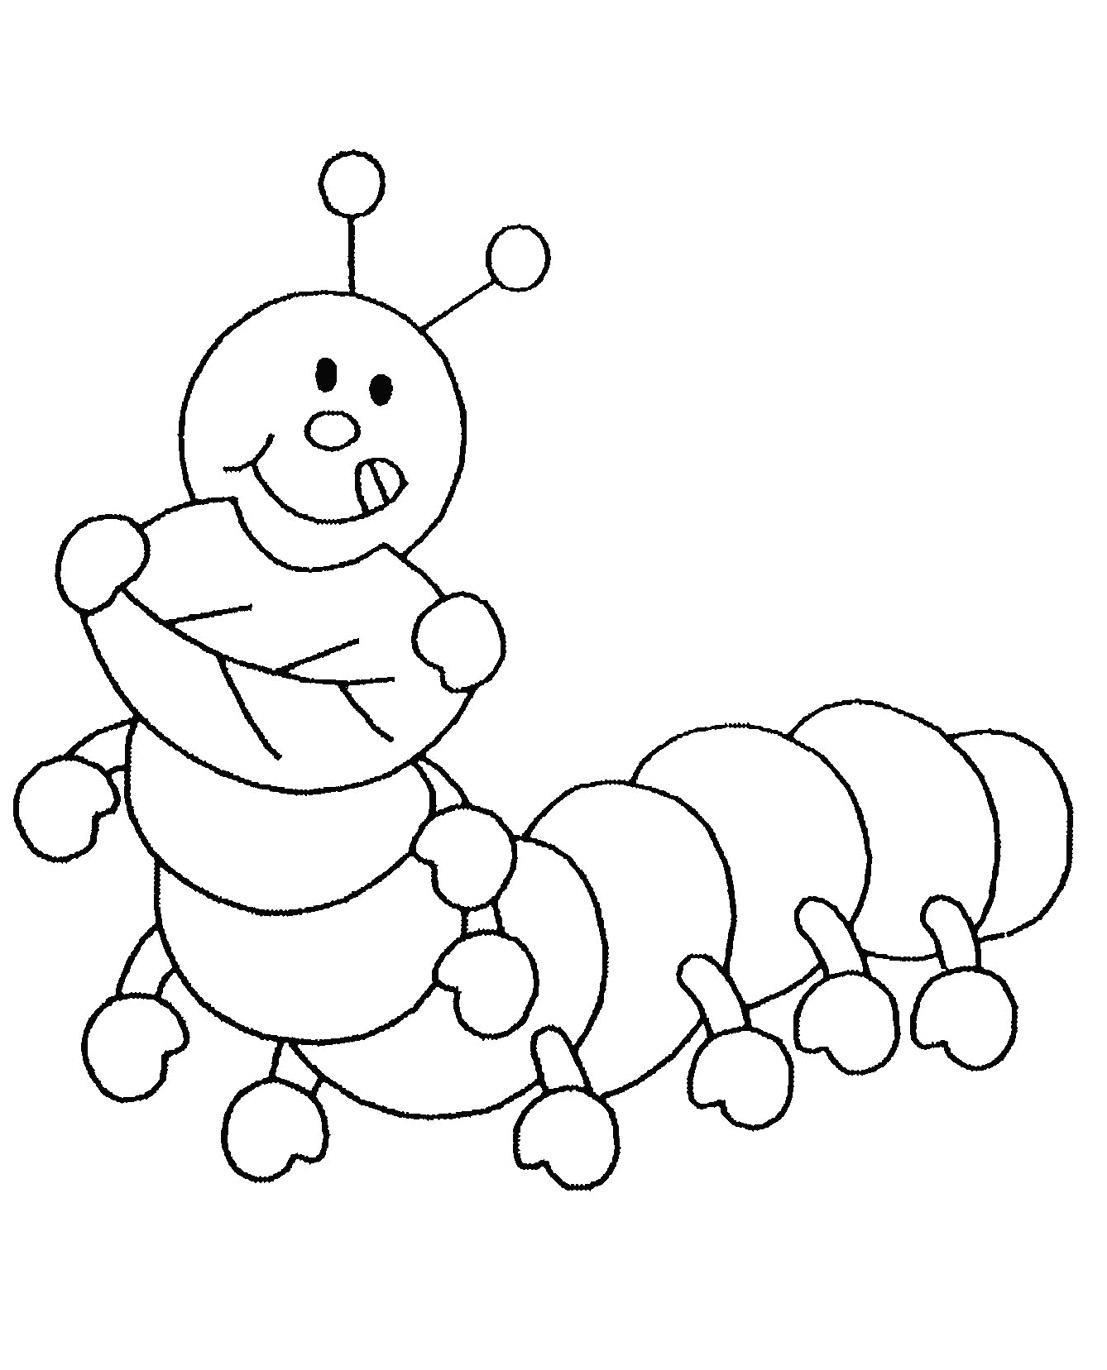 insects-for-children-insects-kids-coloring-pages